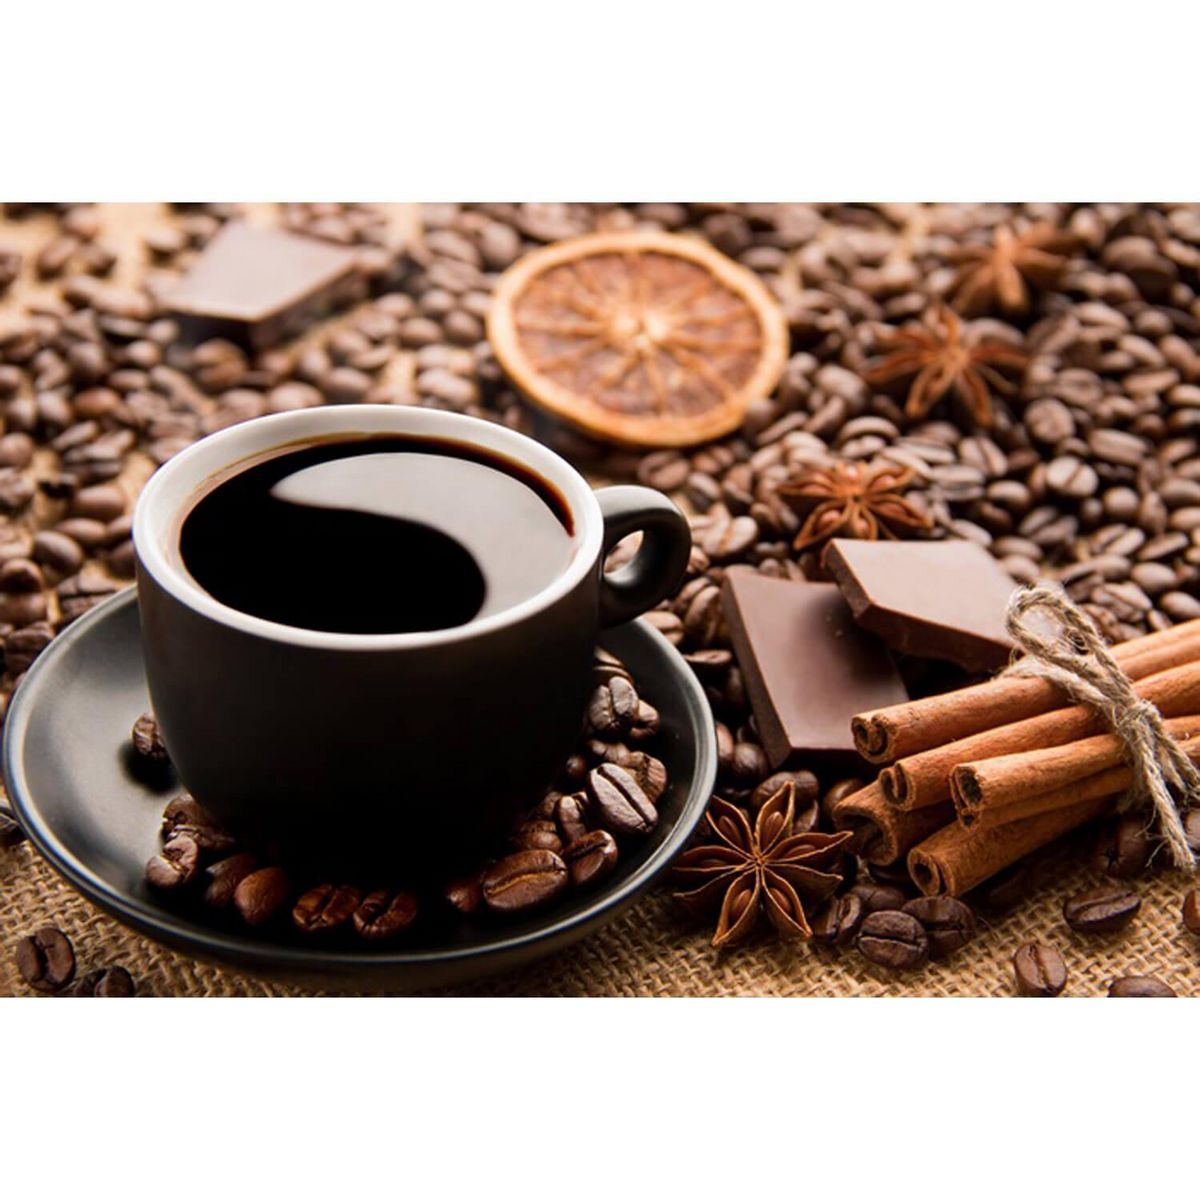  Puzzle 1000 pièces : Coffee Time